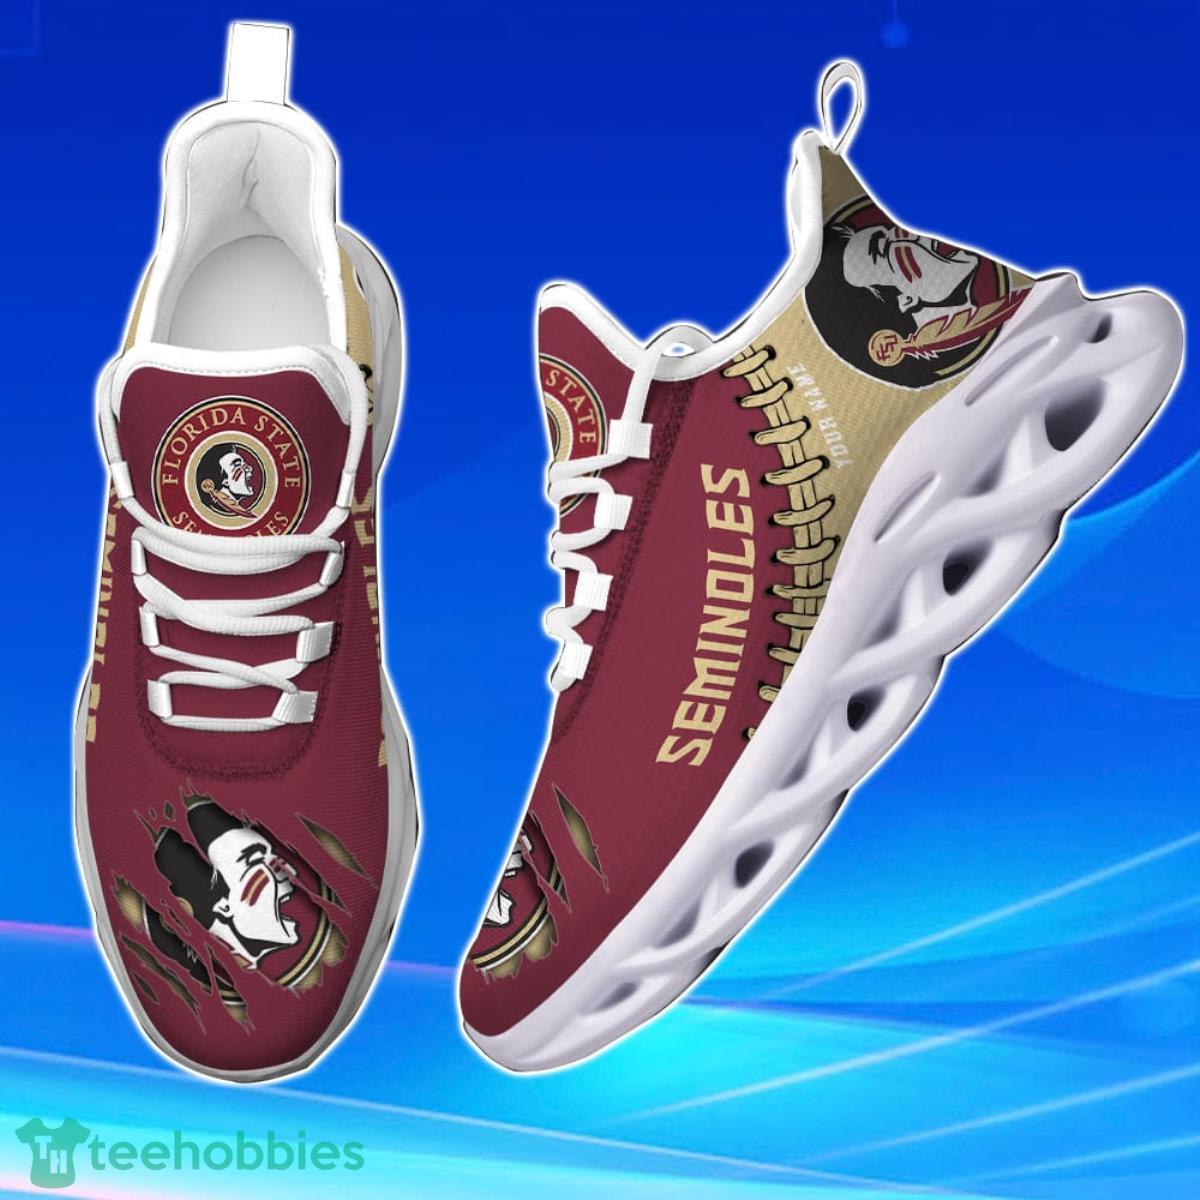 Florida State Seminoles Personalized Max Soul Shoes Unique Gift For Men And Women Fans Product Photo 2